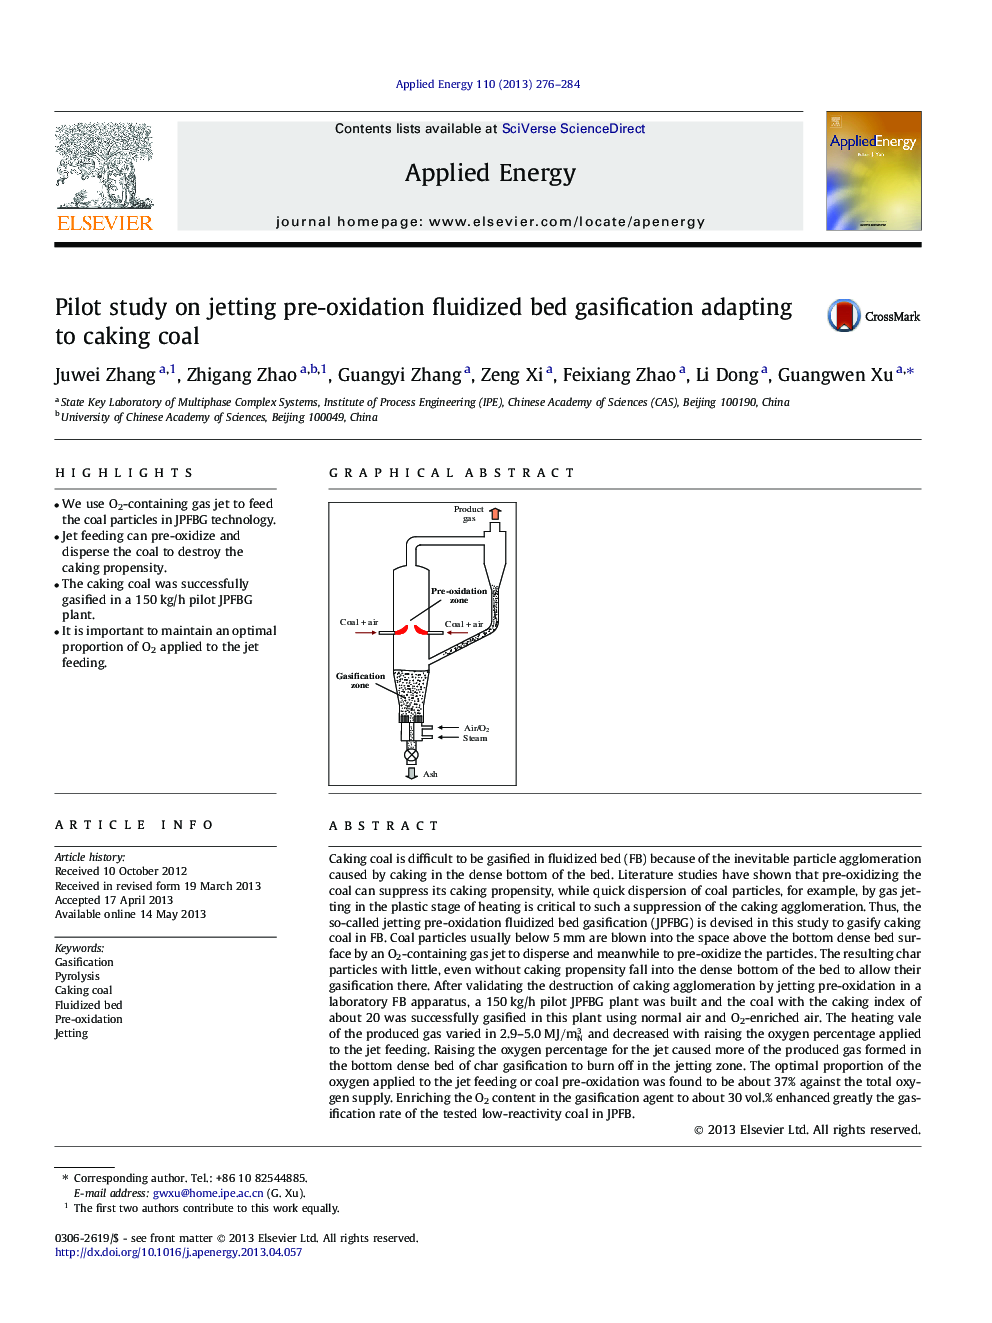 Pilot study on jetting pre-oxidation fluidized bed gasification adapting to caking coal